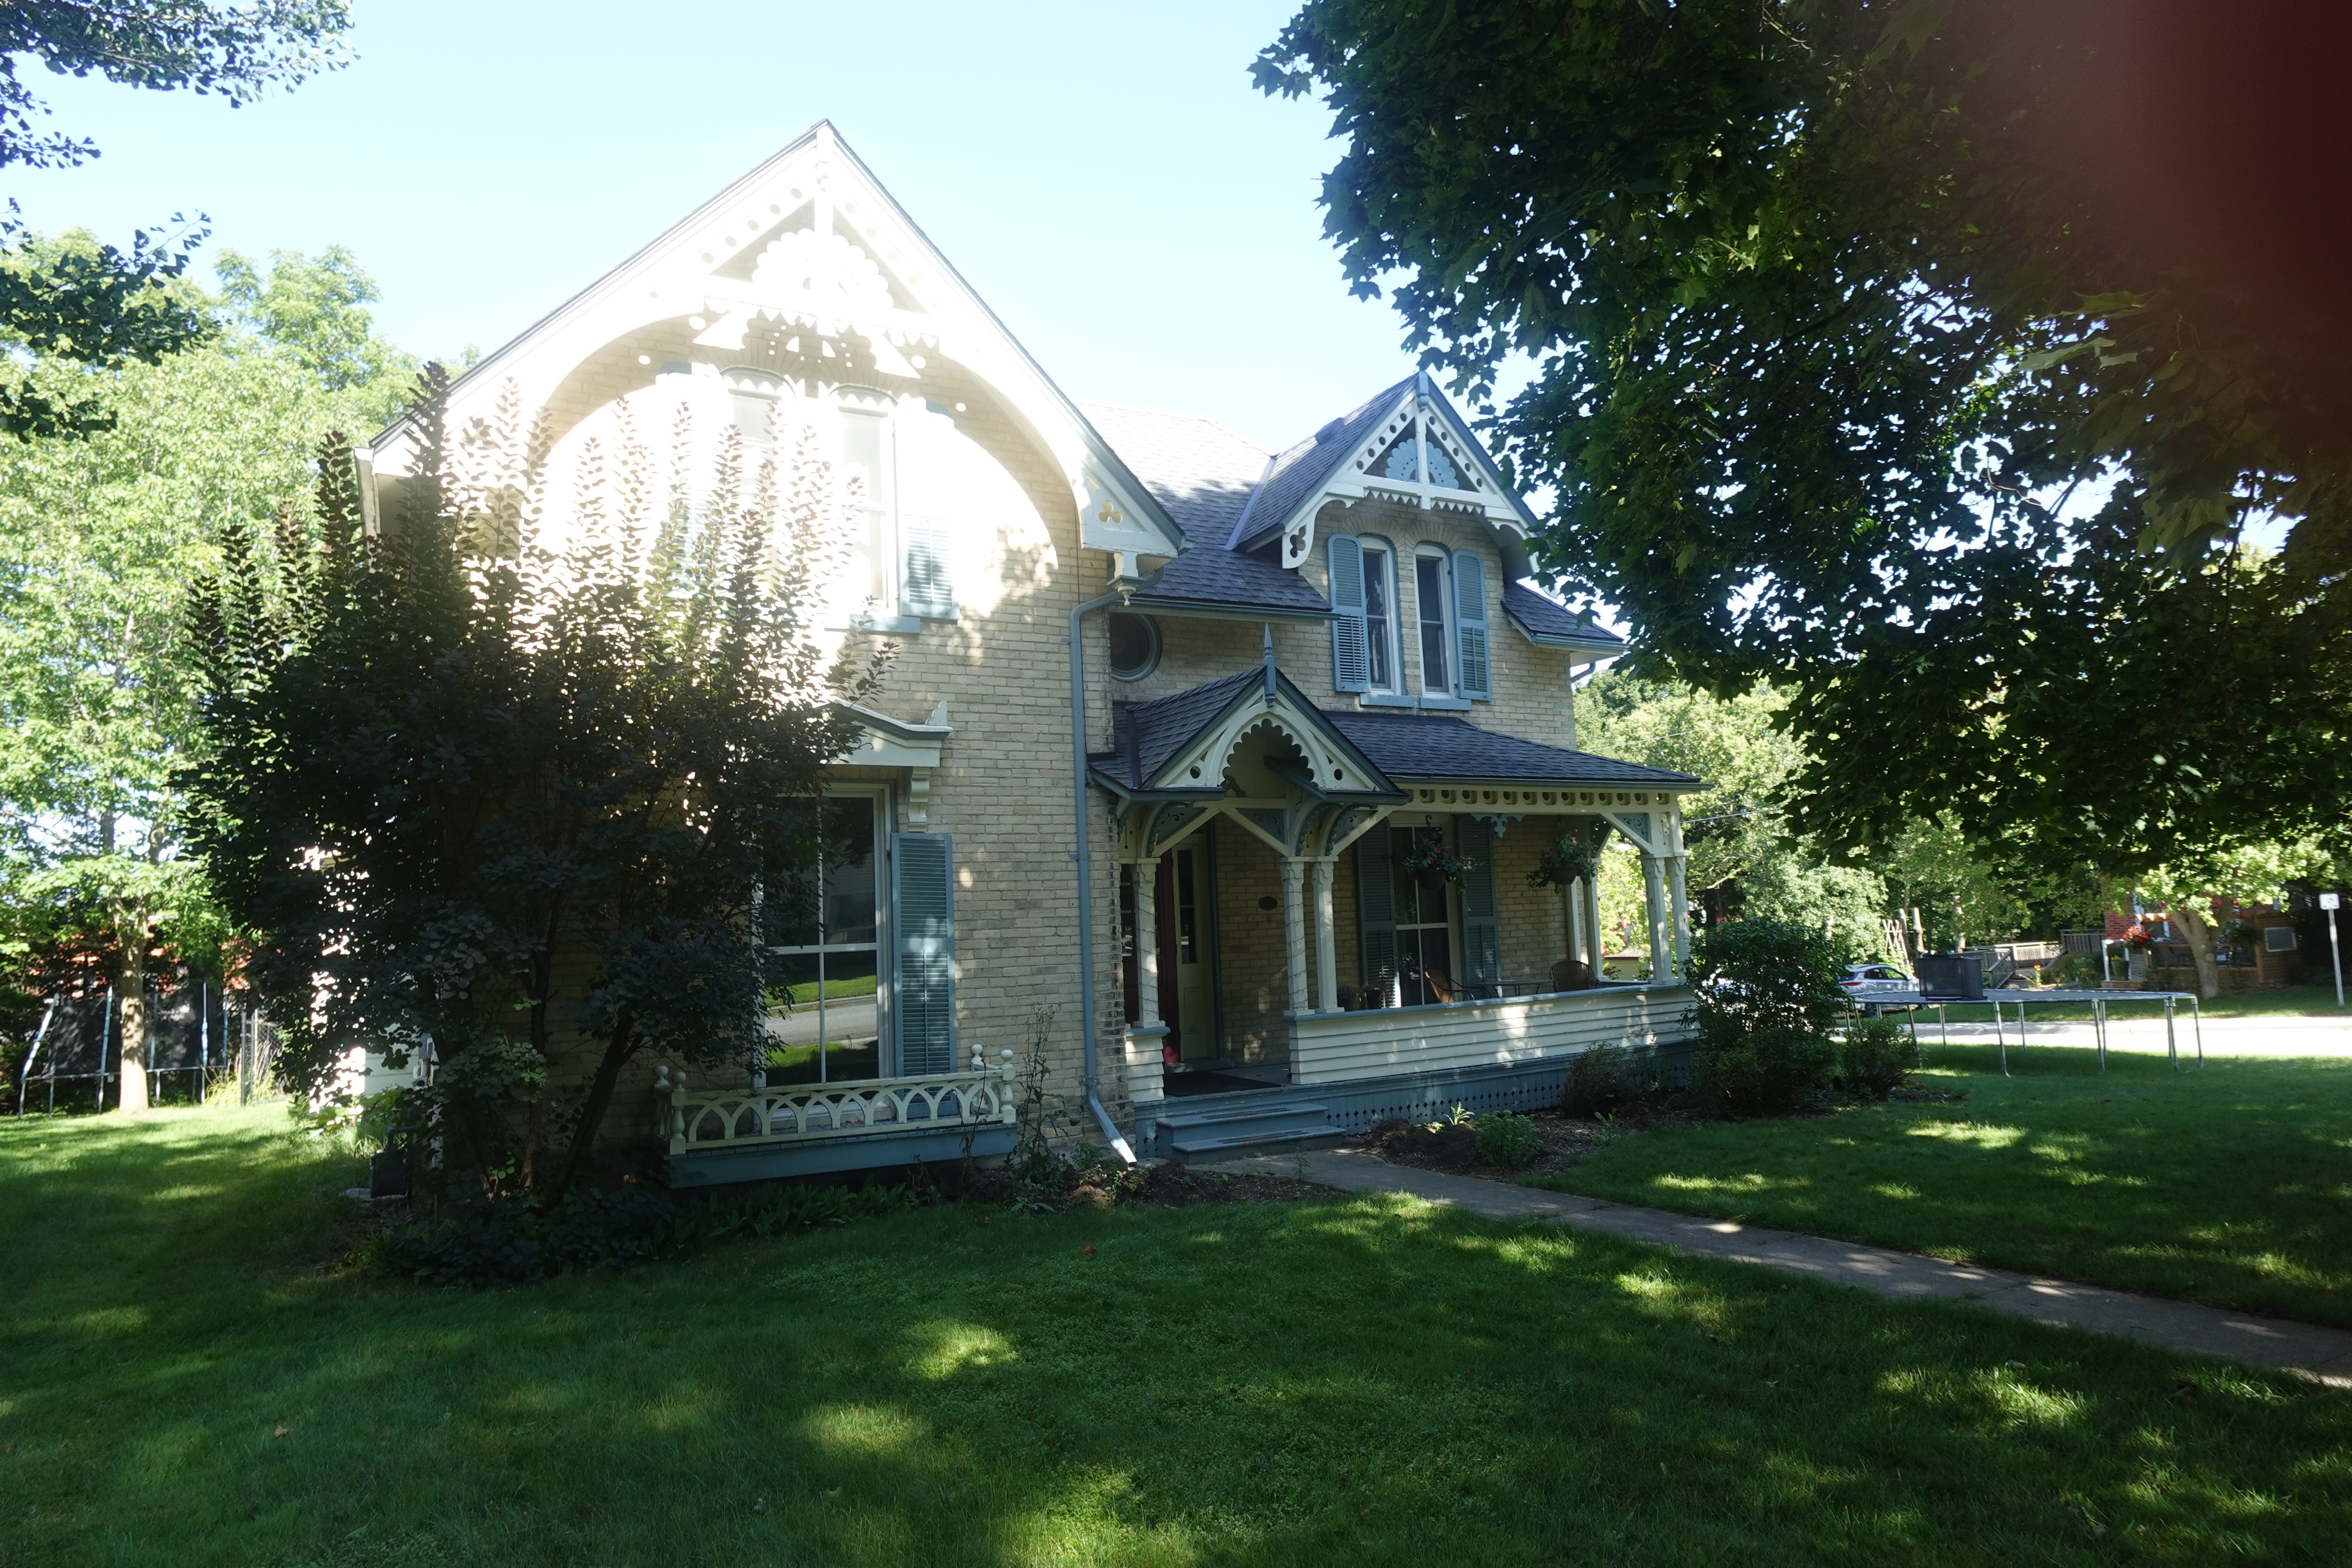 The Donald McInnis House located in Wingham, Ontario